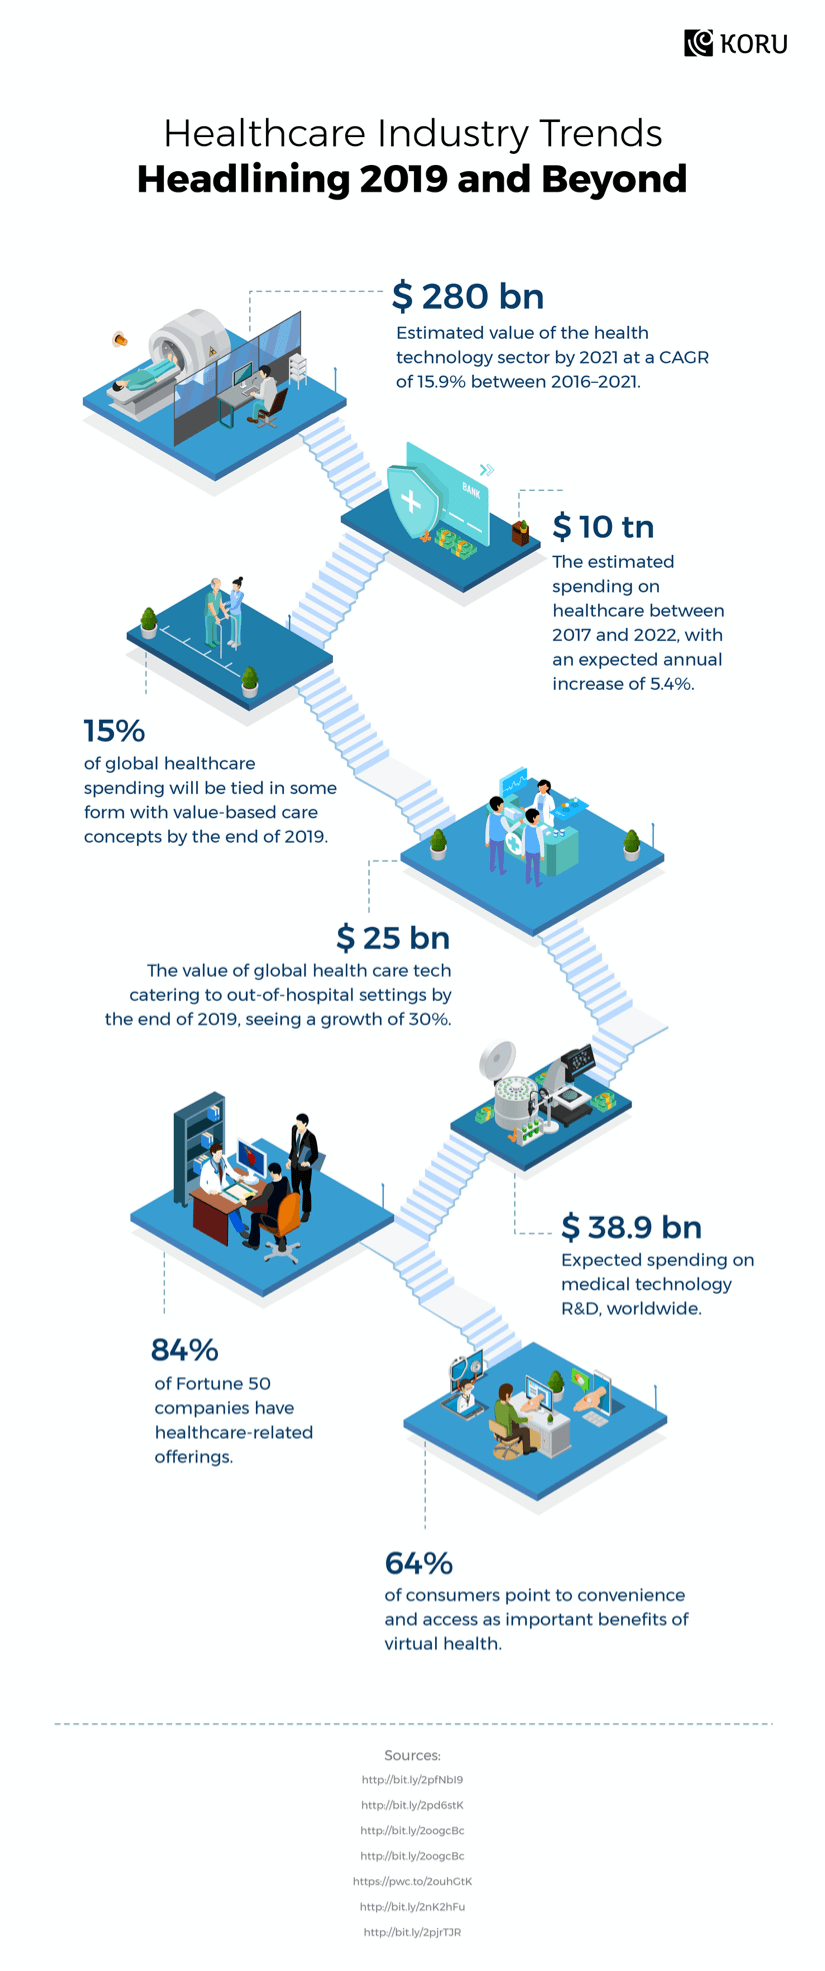 Healthcare Industry Trends 2019 - Infographic 